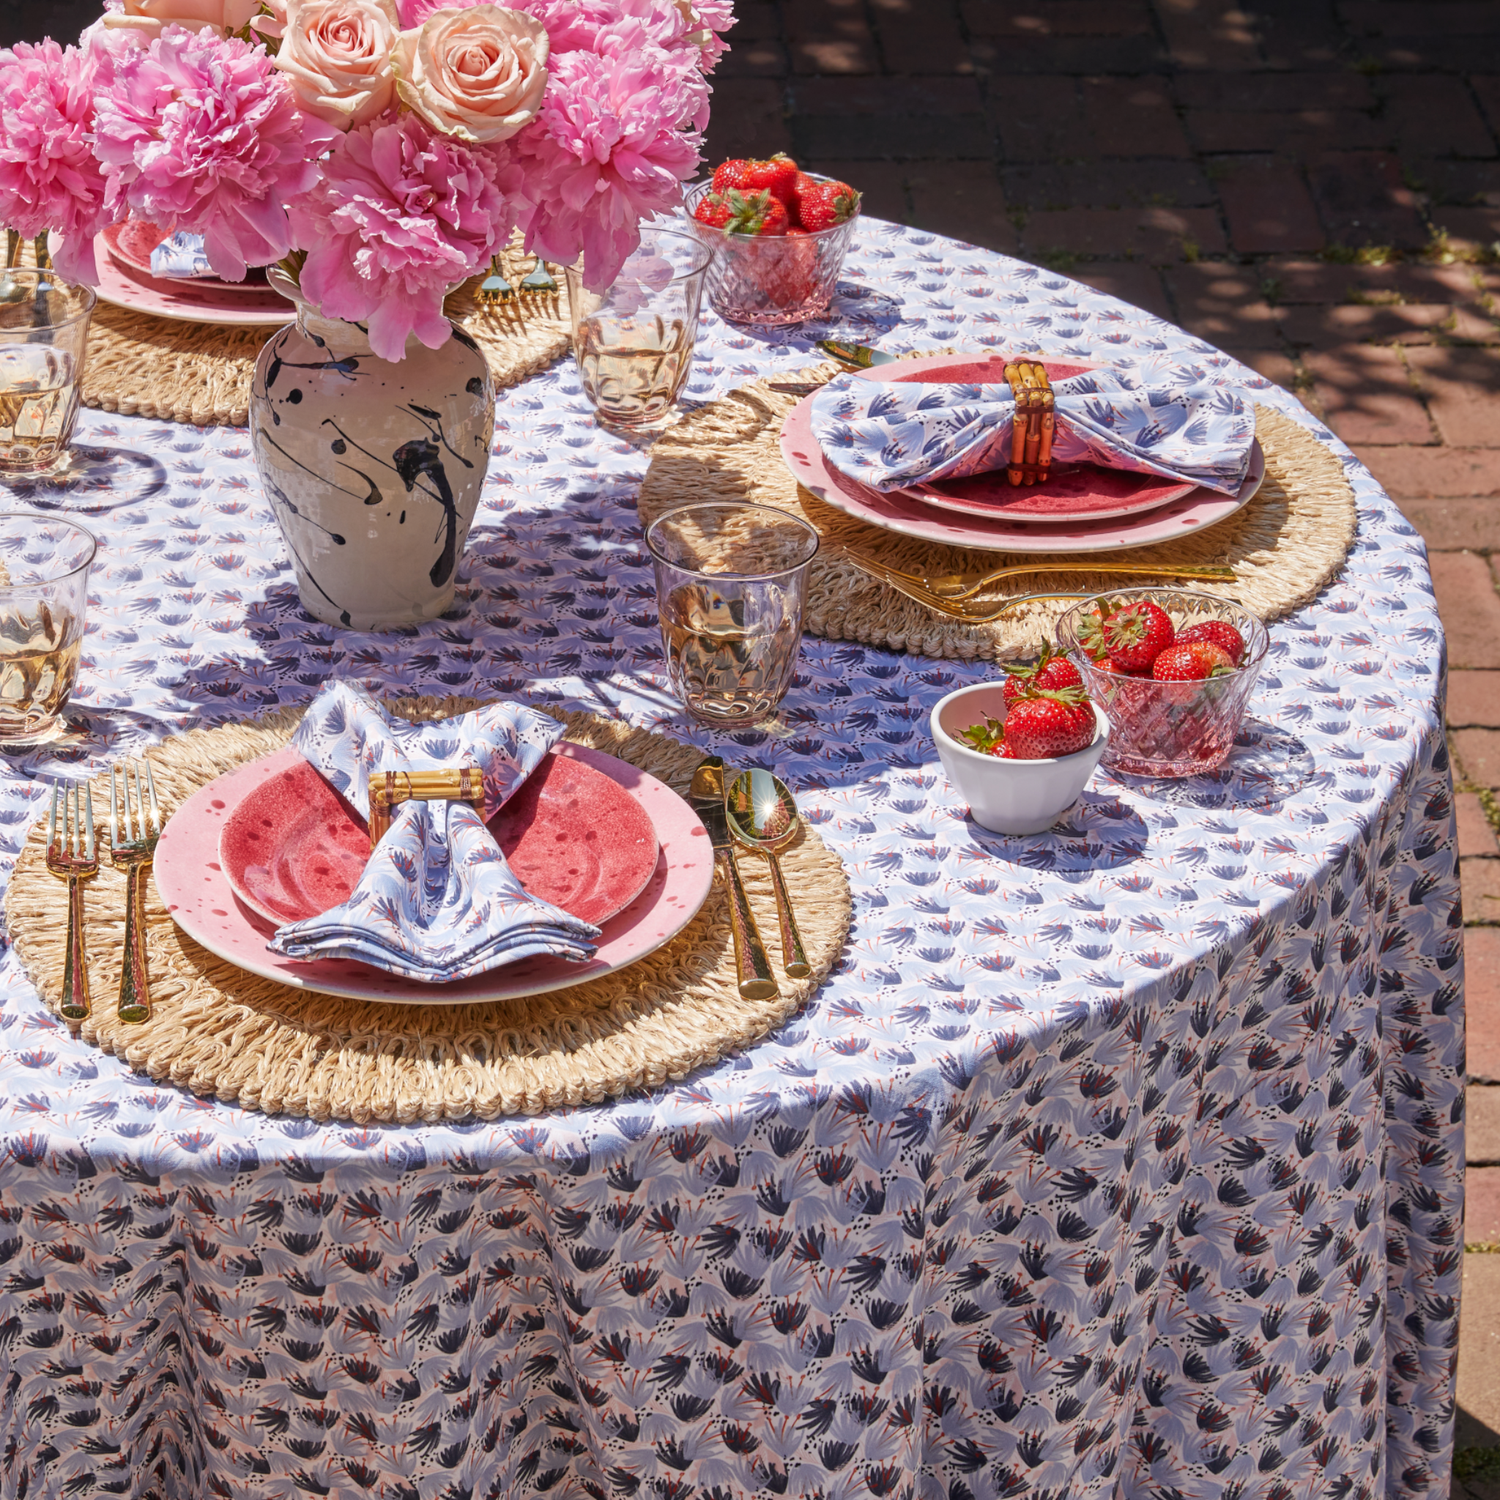 Sky Blue Pattern Printed Tablecloth styled with gold silverware and red and blue printed napkins on top of red and pink plates around the table surrounding pink flowers in cream vase